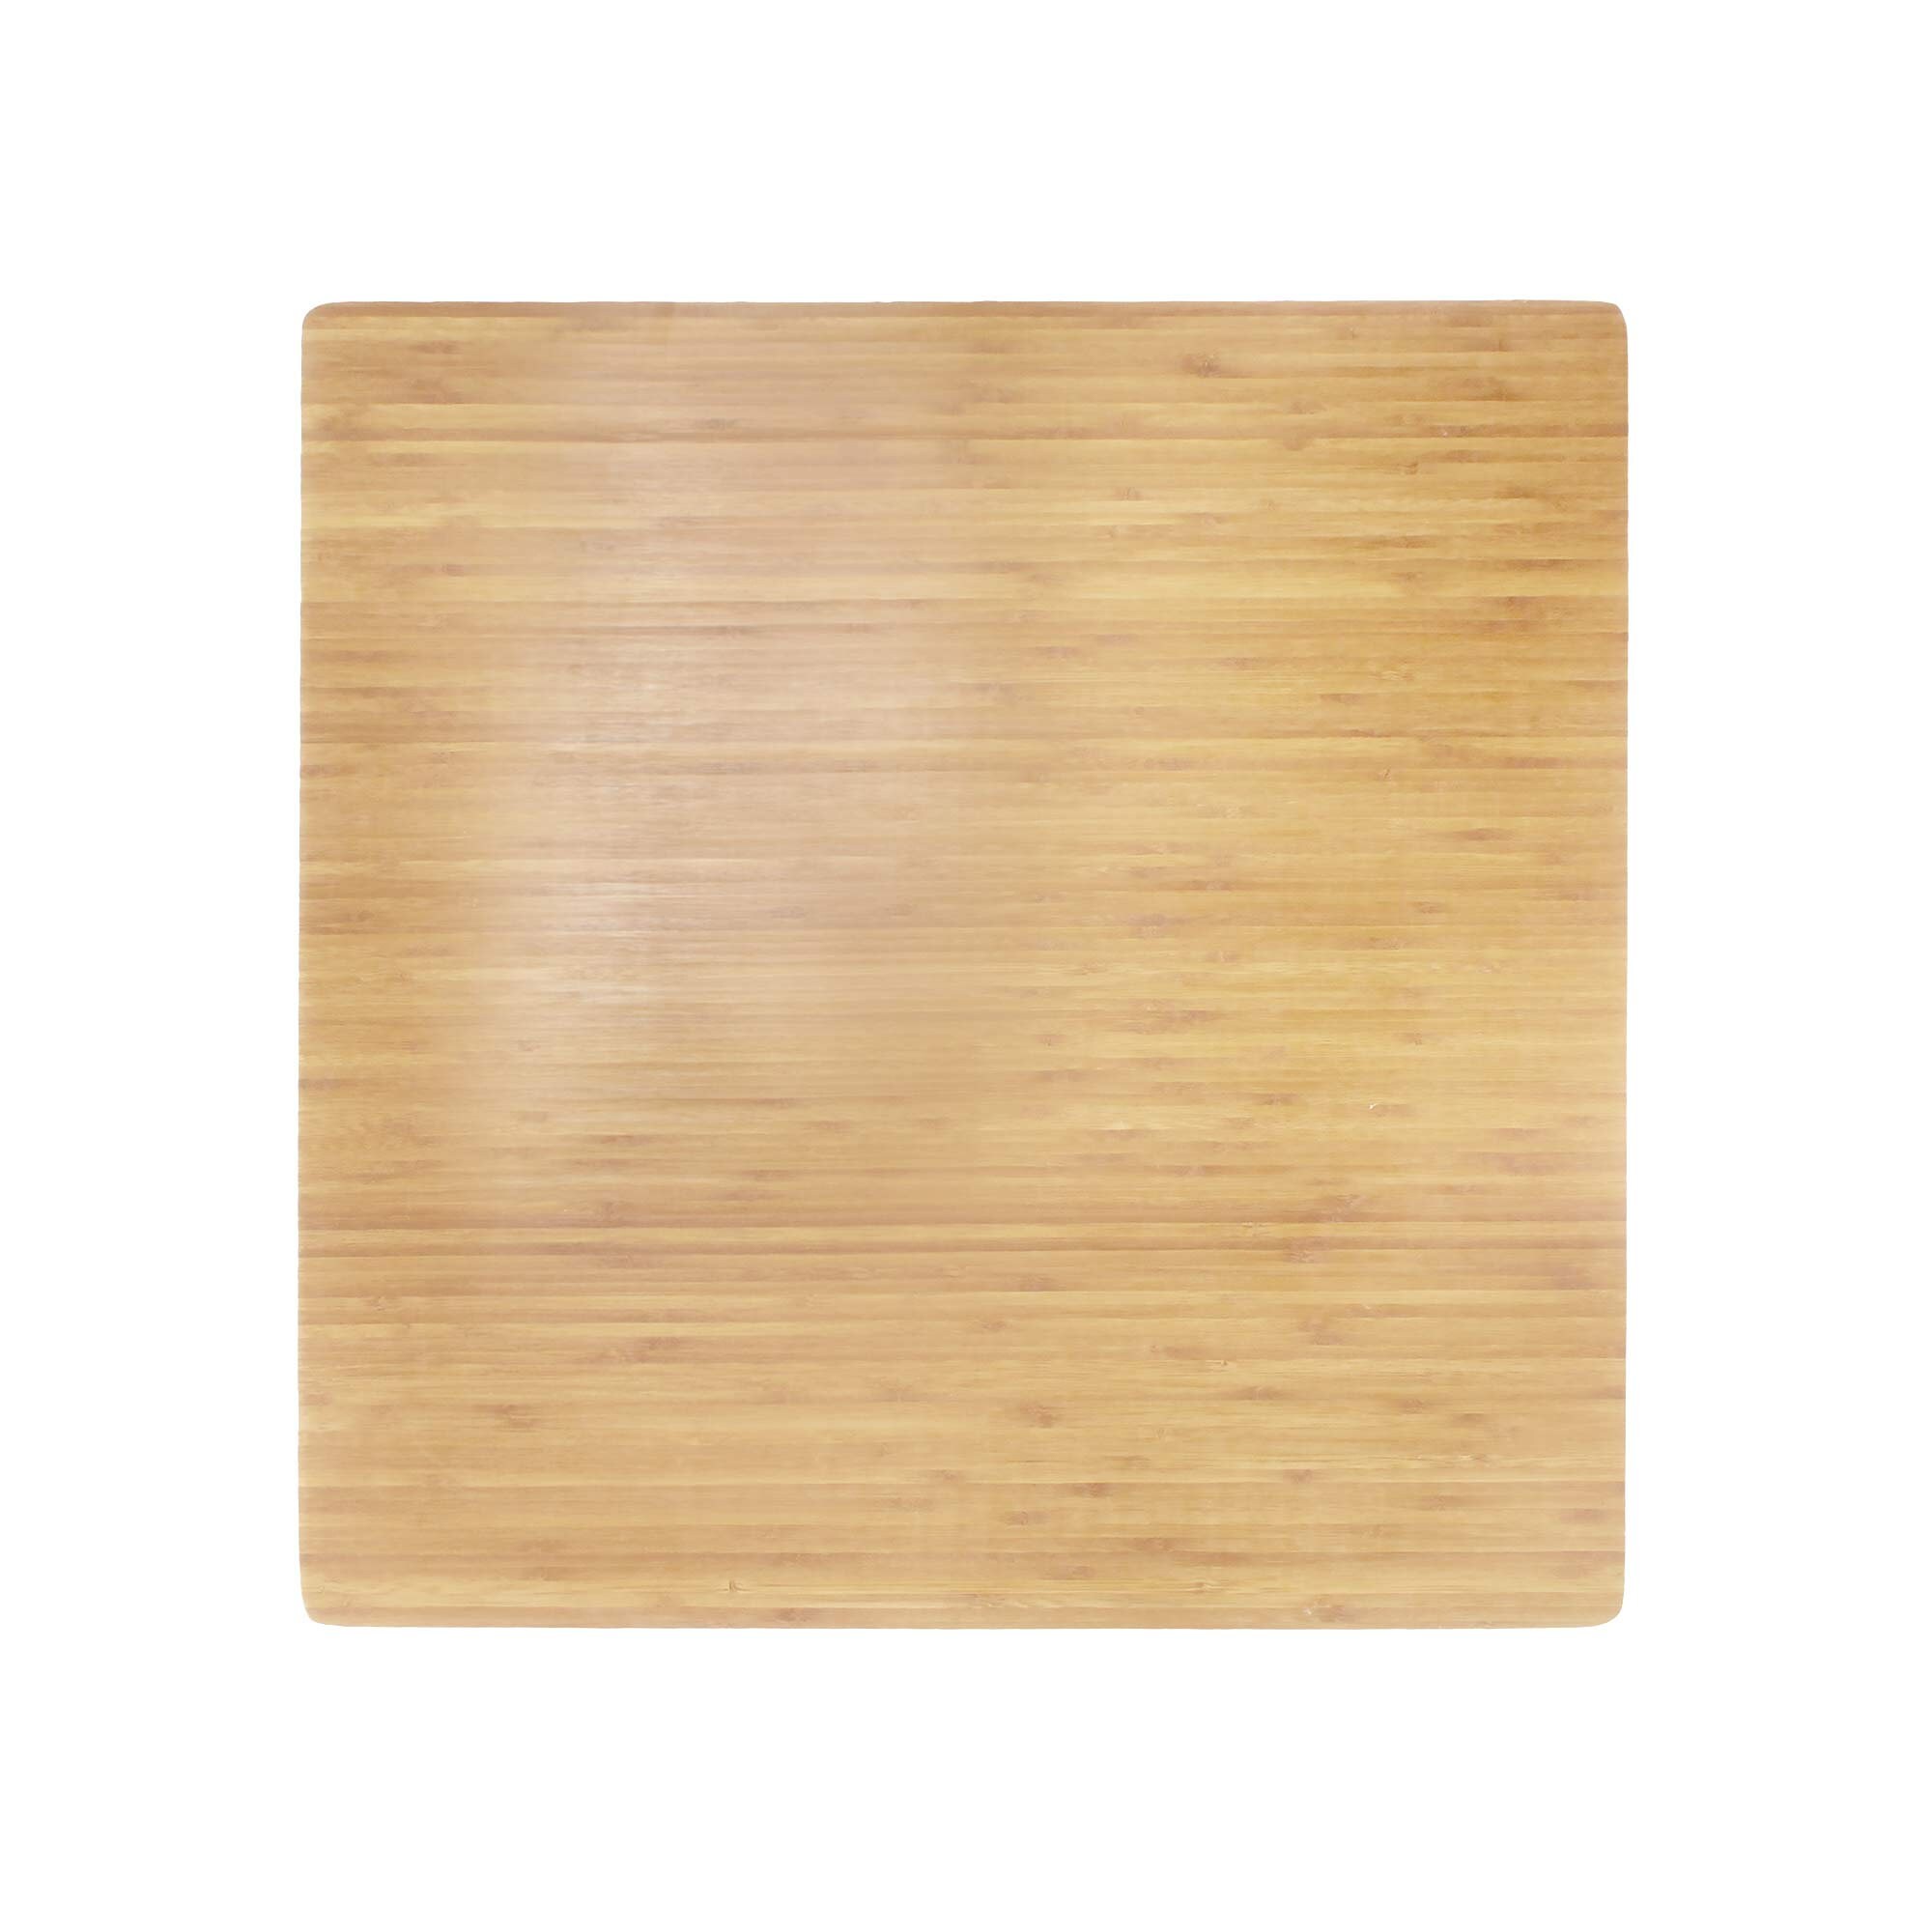 Bassetts Extra Large Bamboo Cutting Boards, (Set Of 3) Chopping